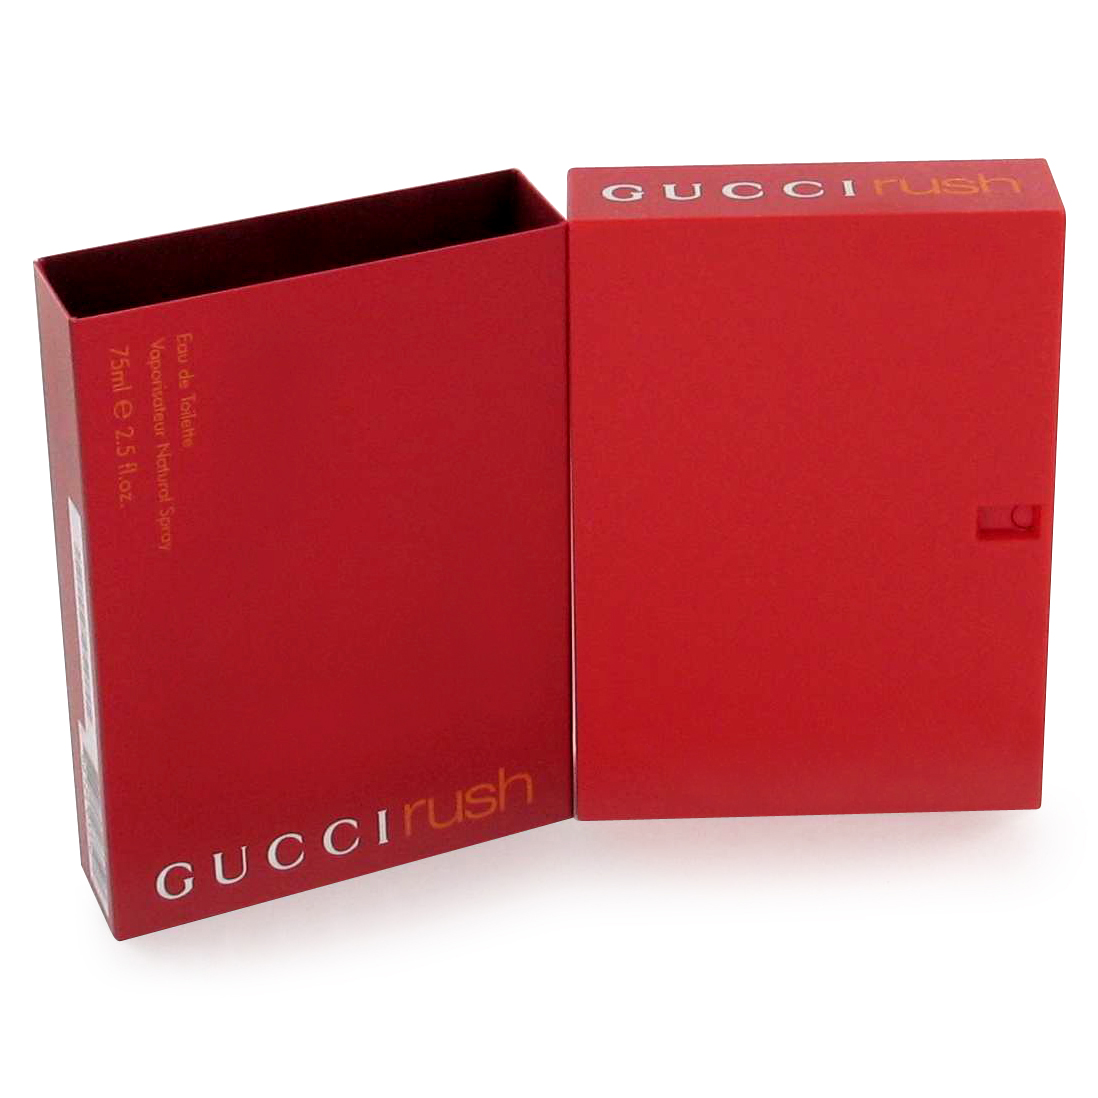 Gucci Rush EDT for Women | Madame Moiselle